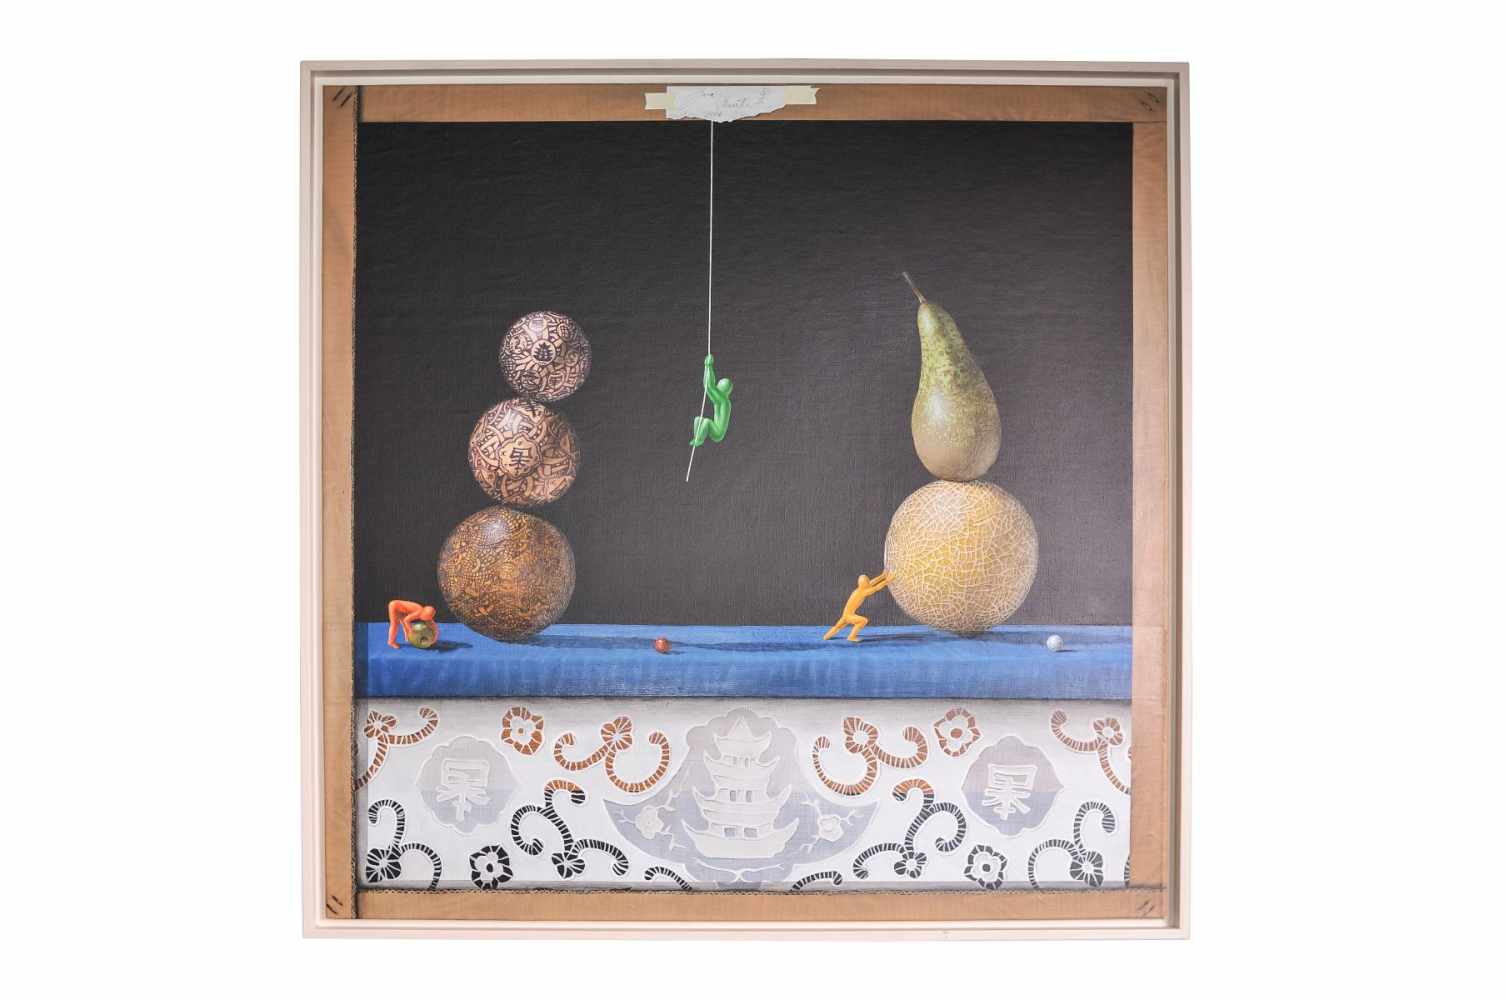 Jose Vicente "Still life with balls, fruit and colorful men"